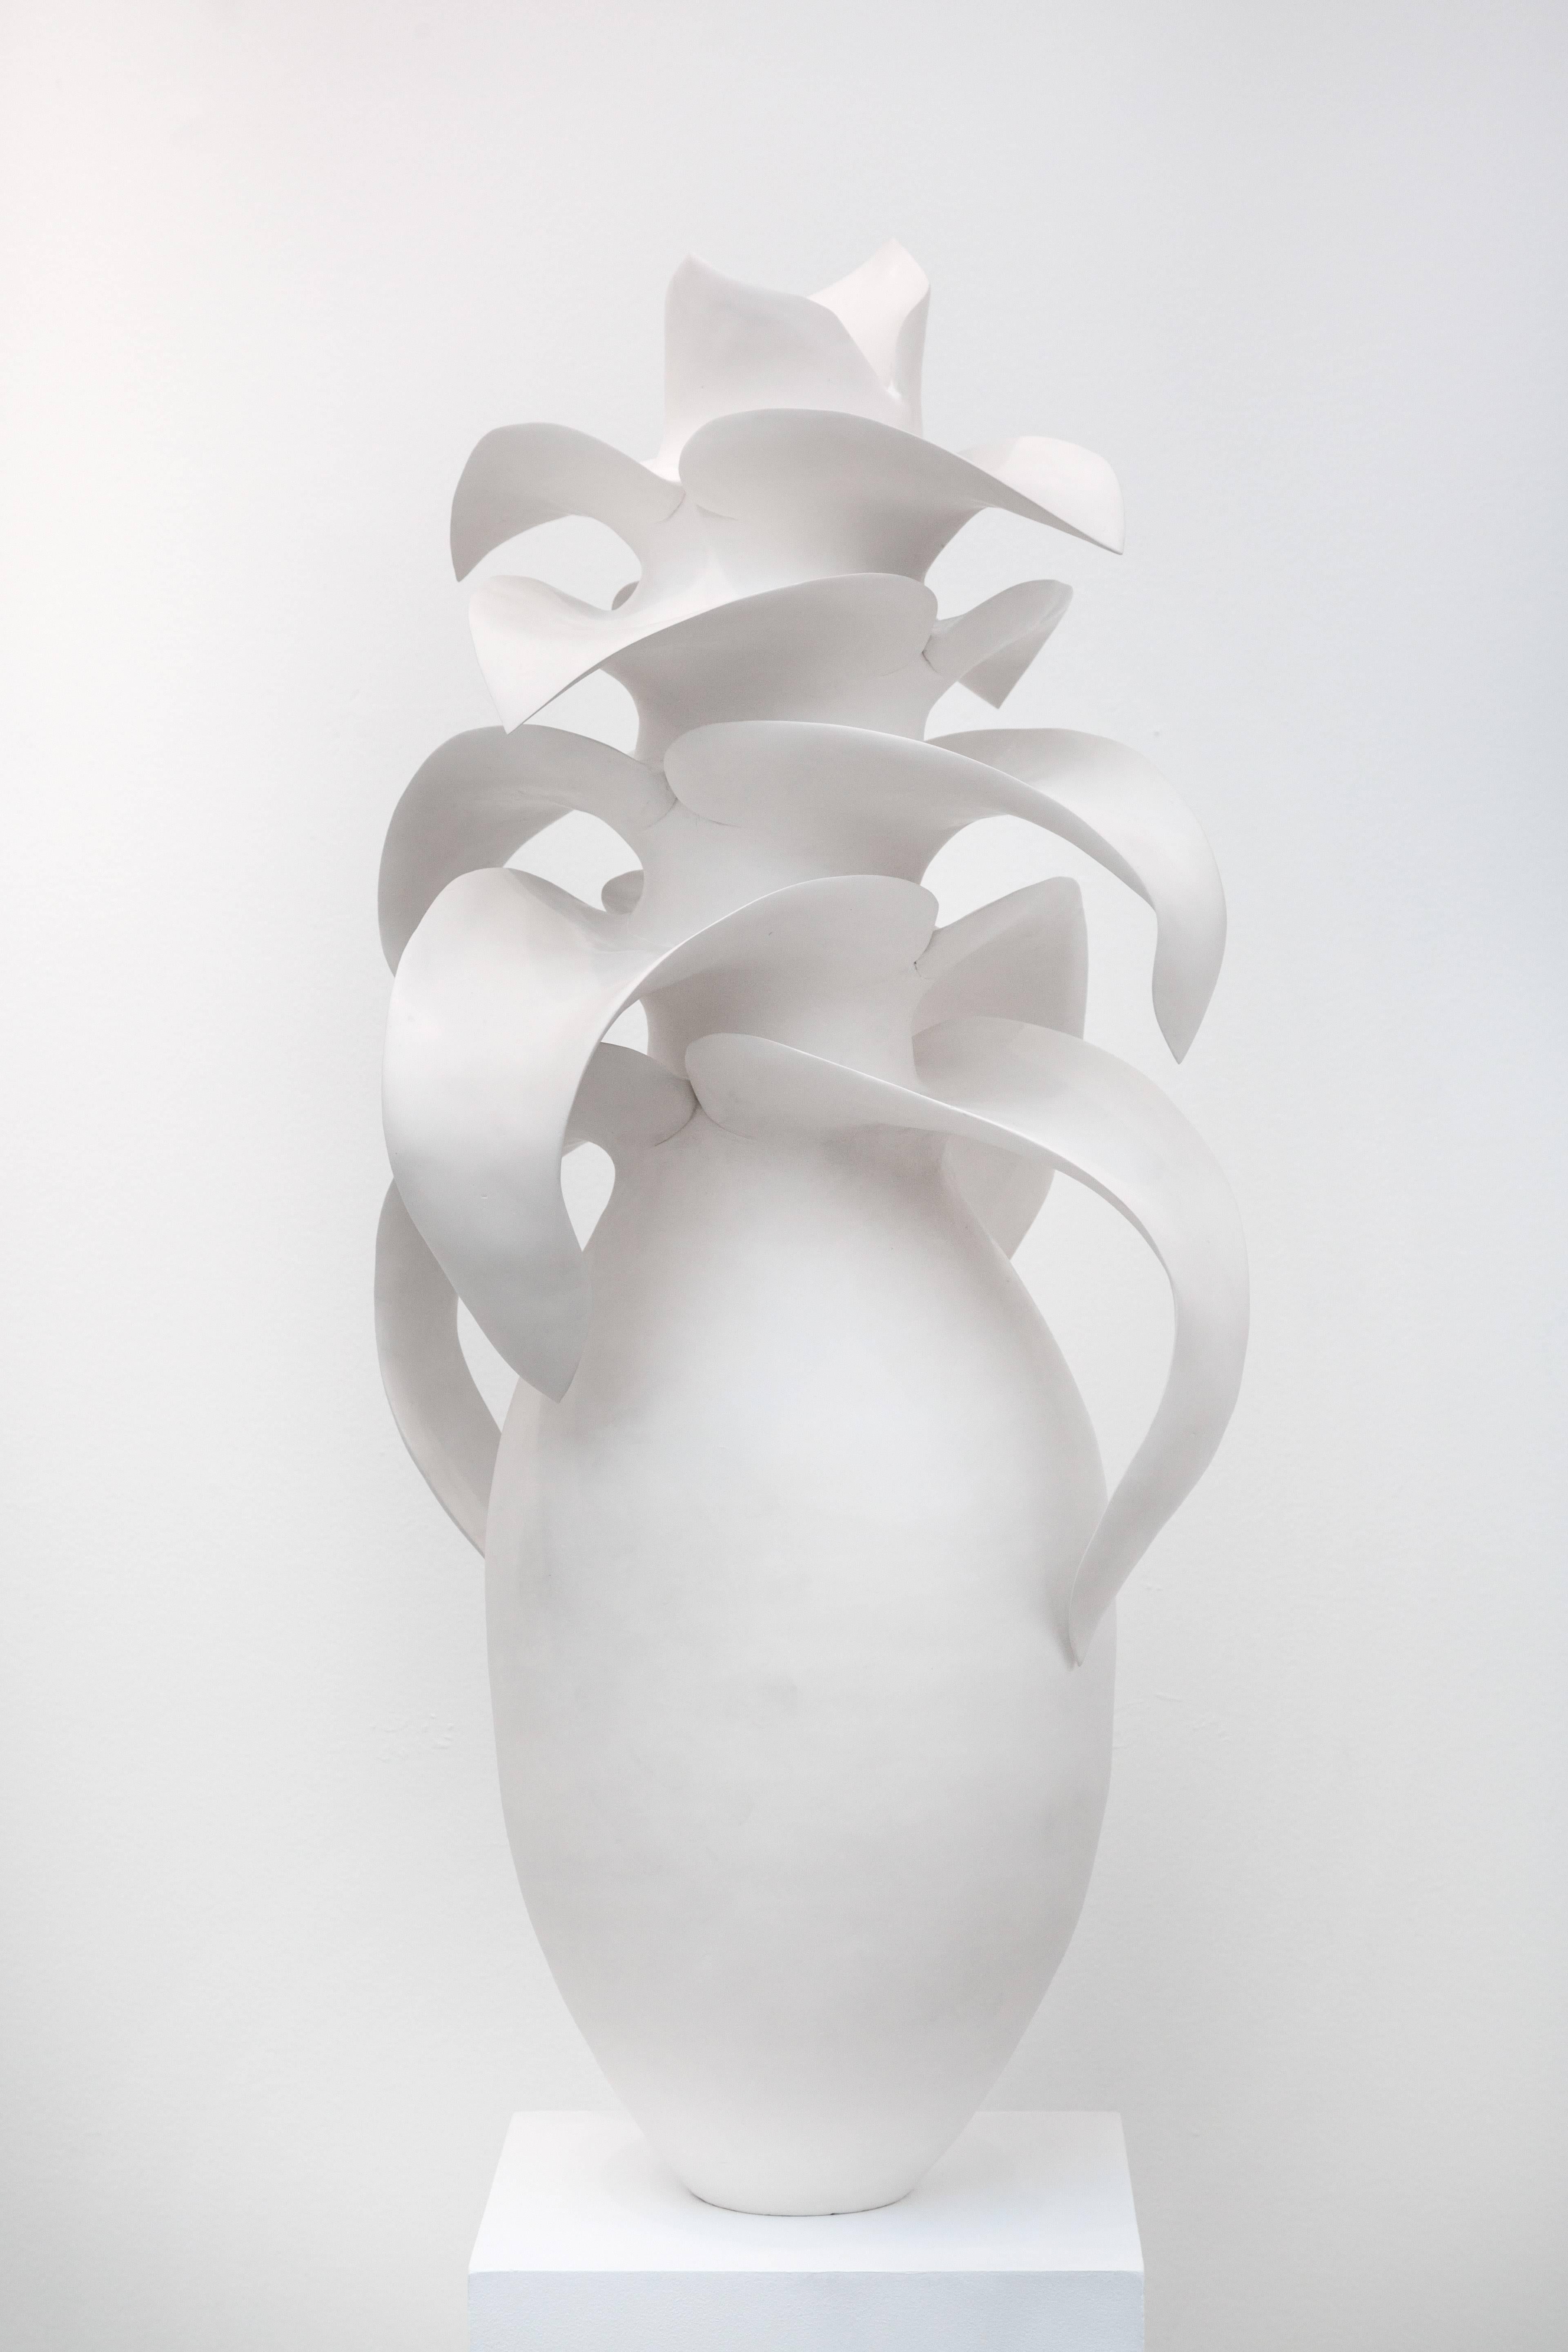 Succulent by Astrid Dahl, white earthenware, consolidated, wax finish, 2018. 

The photographic work of late XIXth century German botanist Karl Blossfeldt has fascinated ceramicist Astrid Dahl since she studied at The Durban Techinikon of Natal in